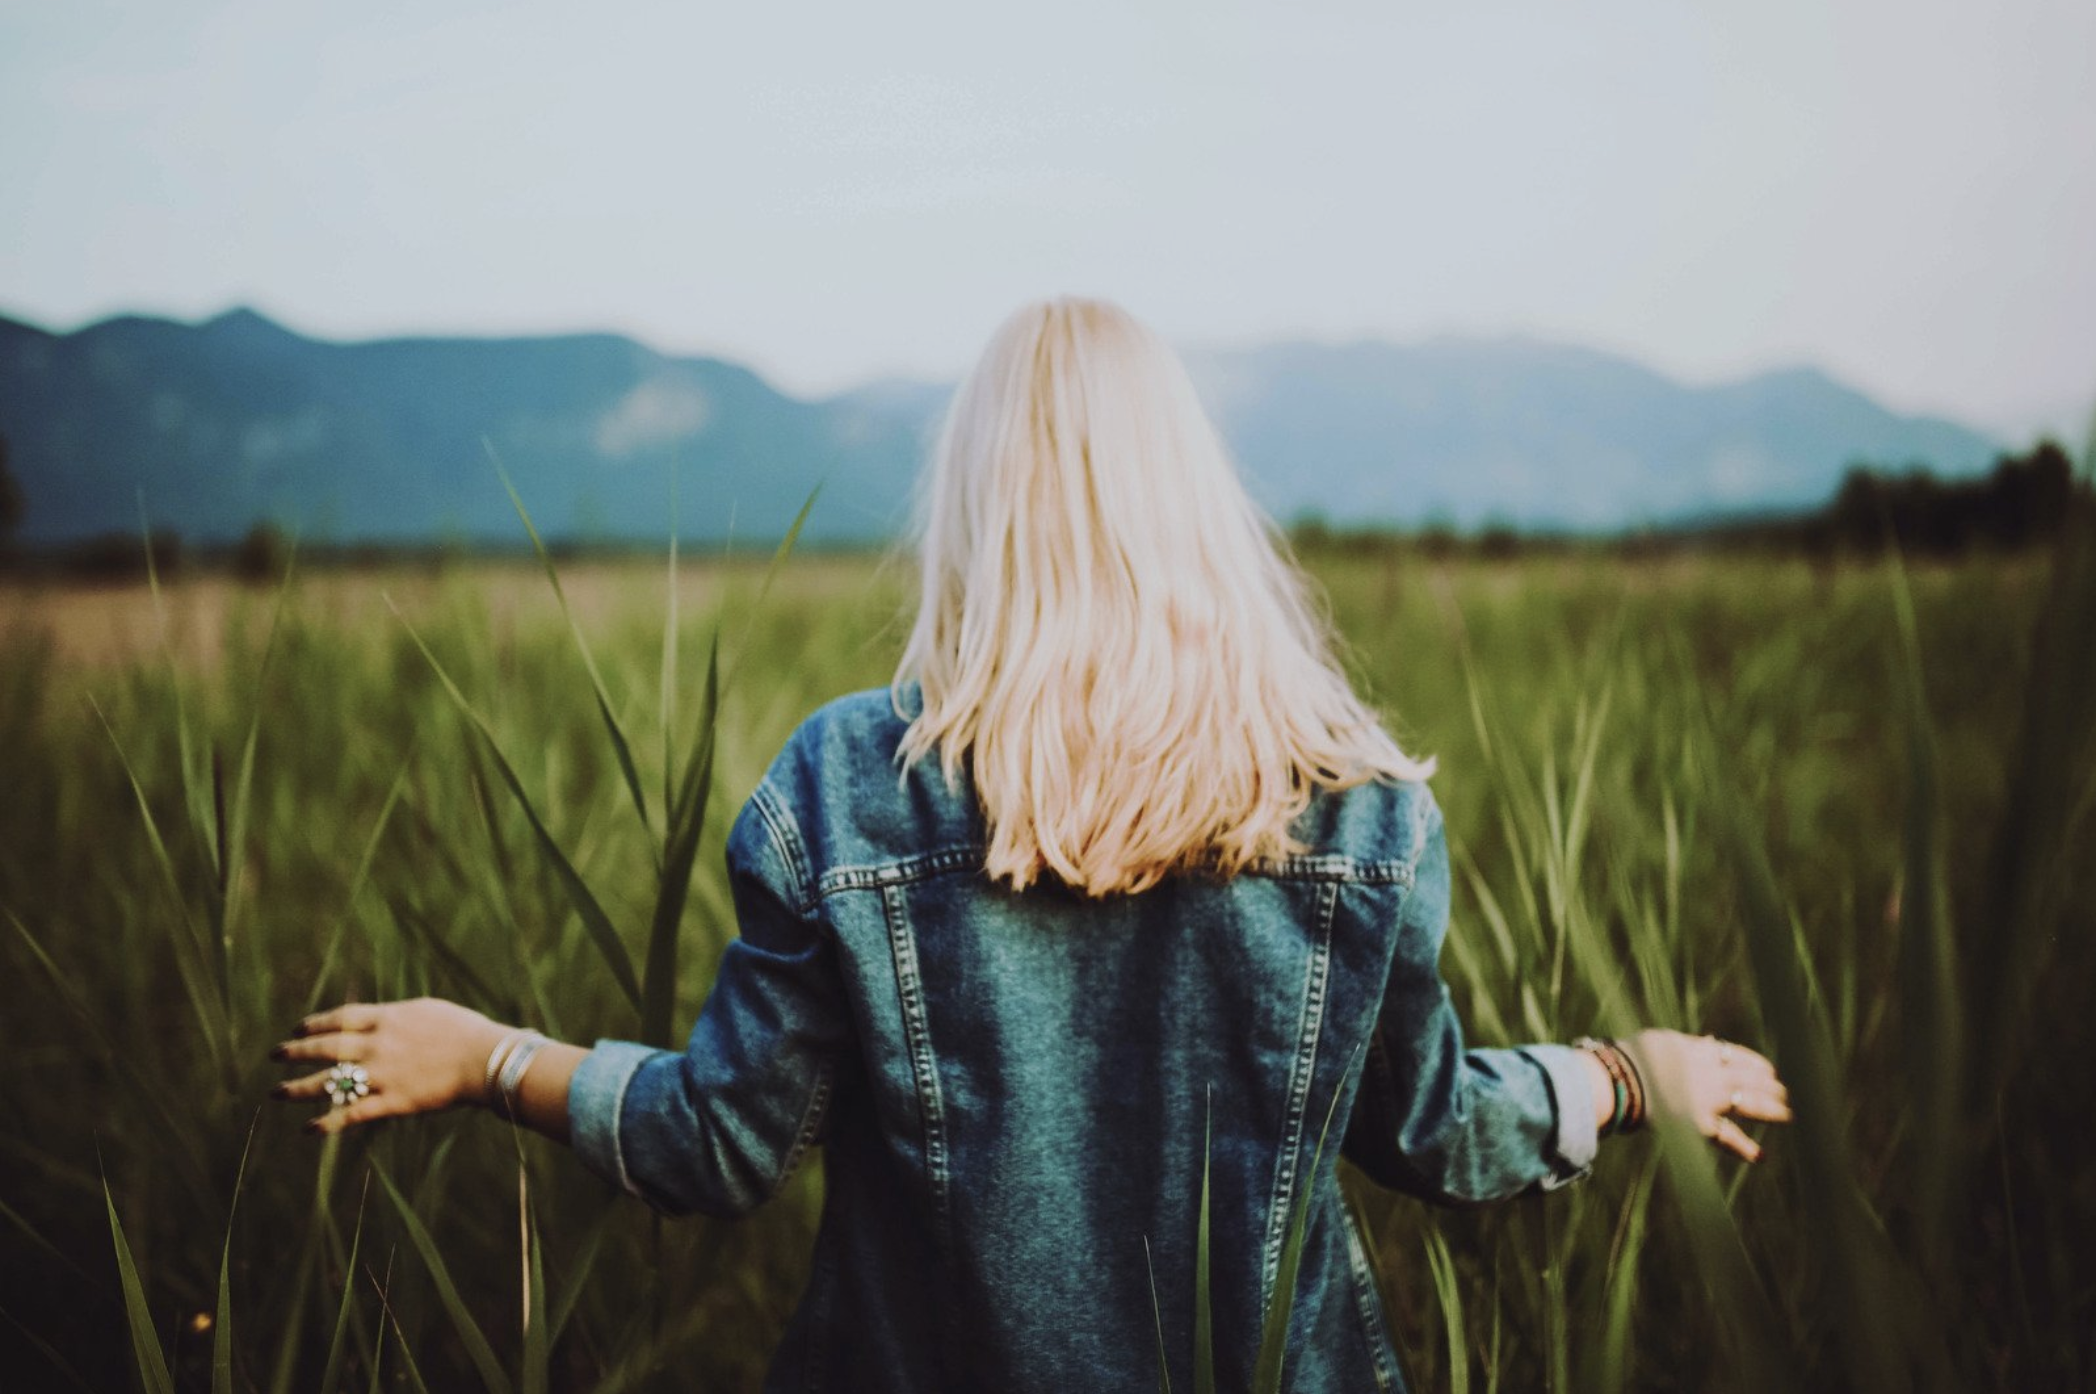 Blonde young woman walking through a field of tall green grass with her hands out feeling the grass and feeling the wind blow her hair